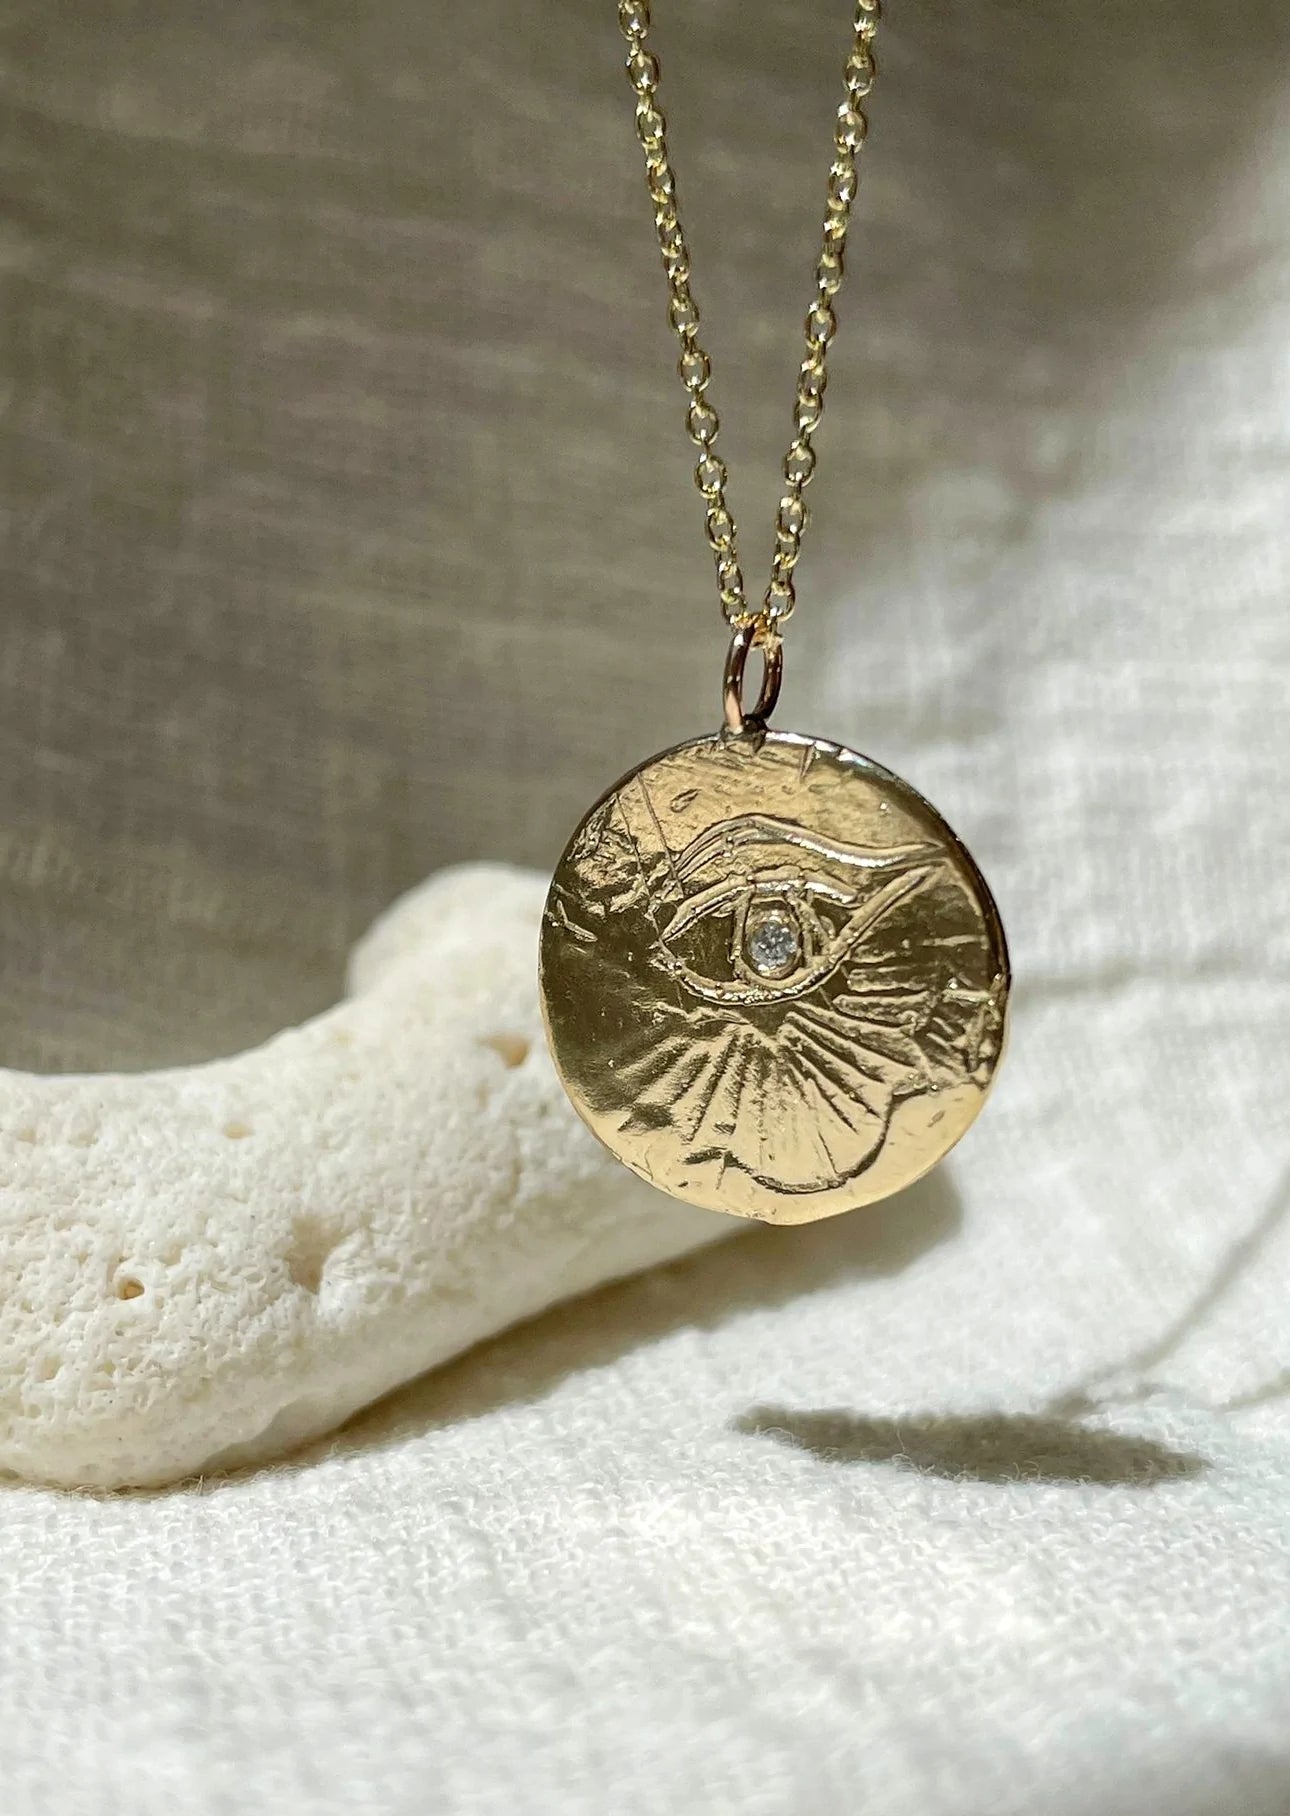 eye of love medallion necklace - made to order